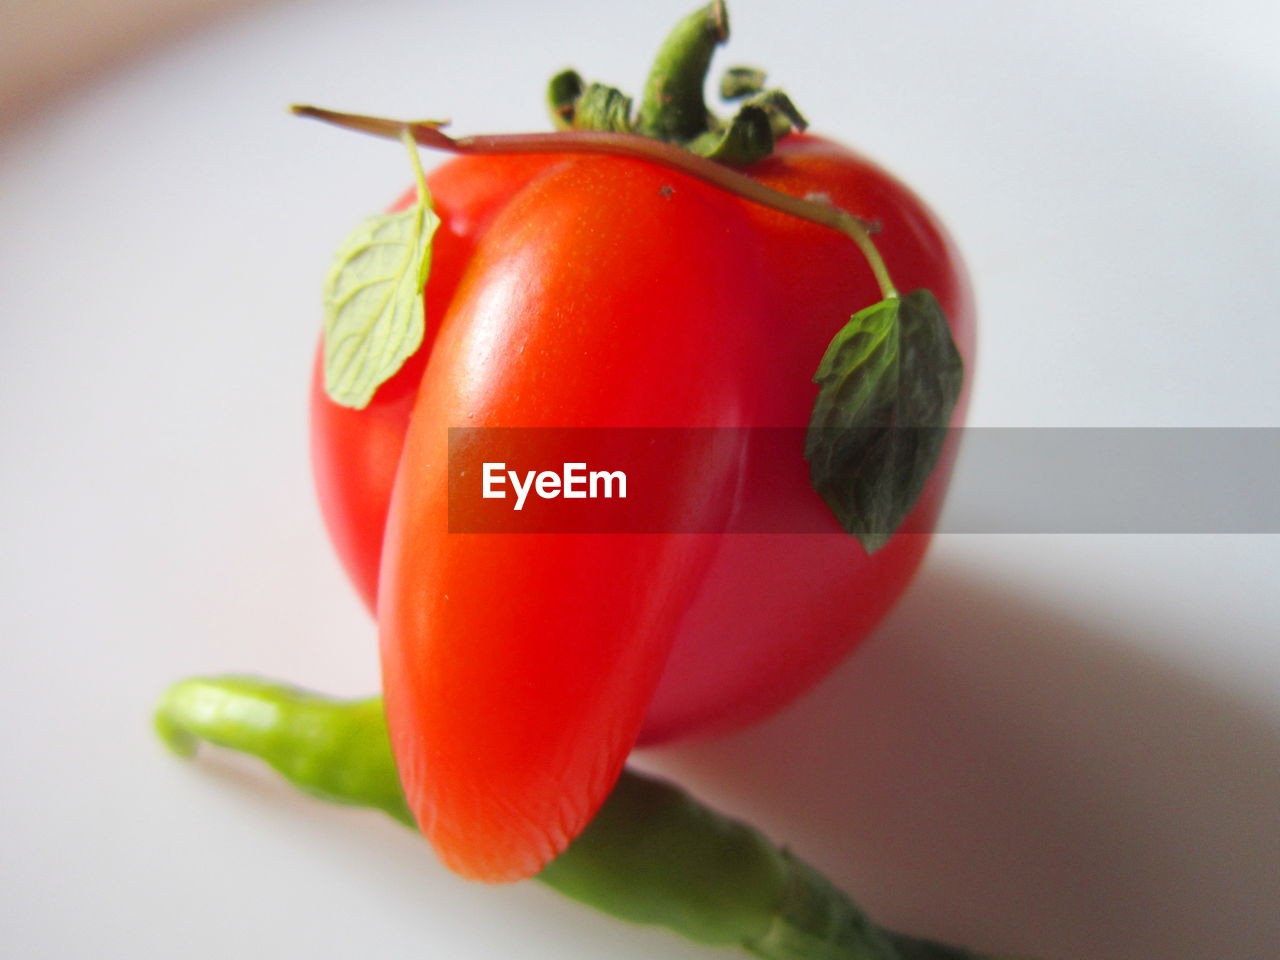 CLOSE-UP OF RED TOMATO